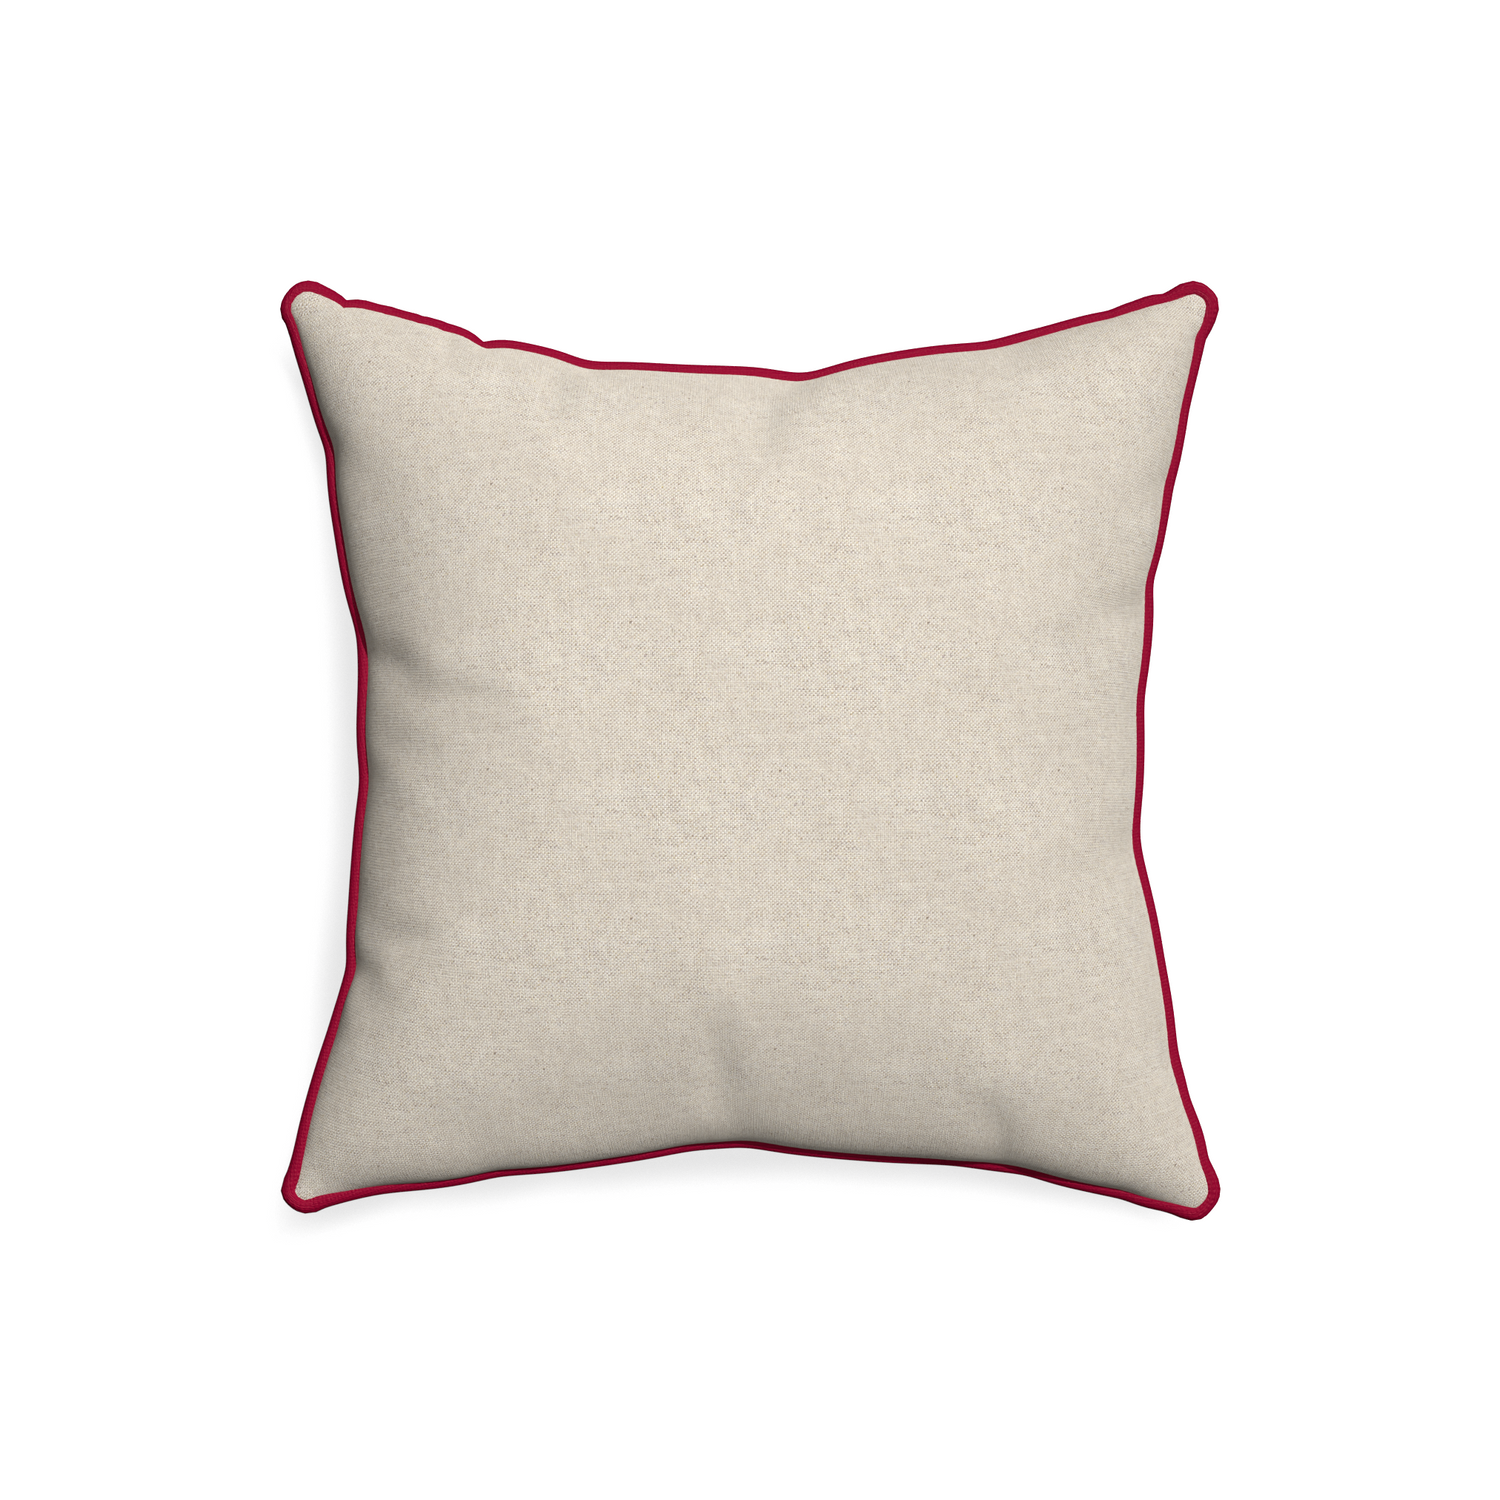 20-square oat custom light brownpillow with raspberry piping on white background